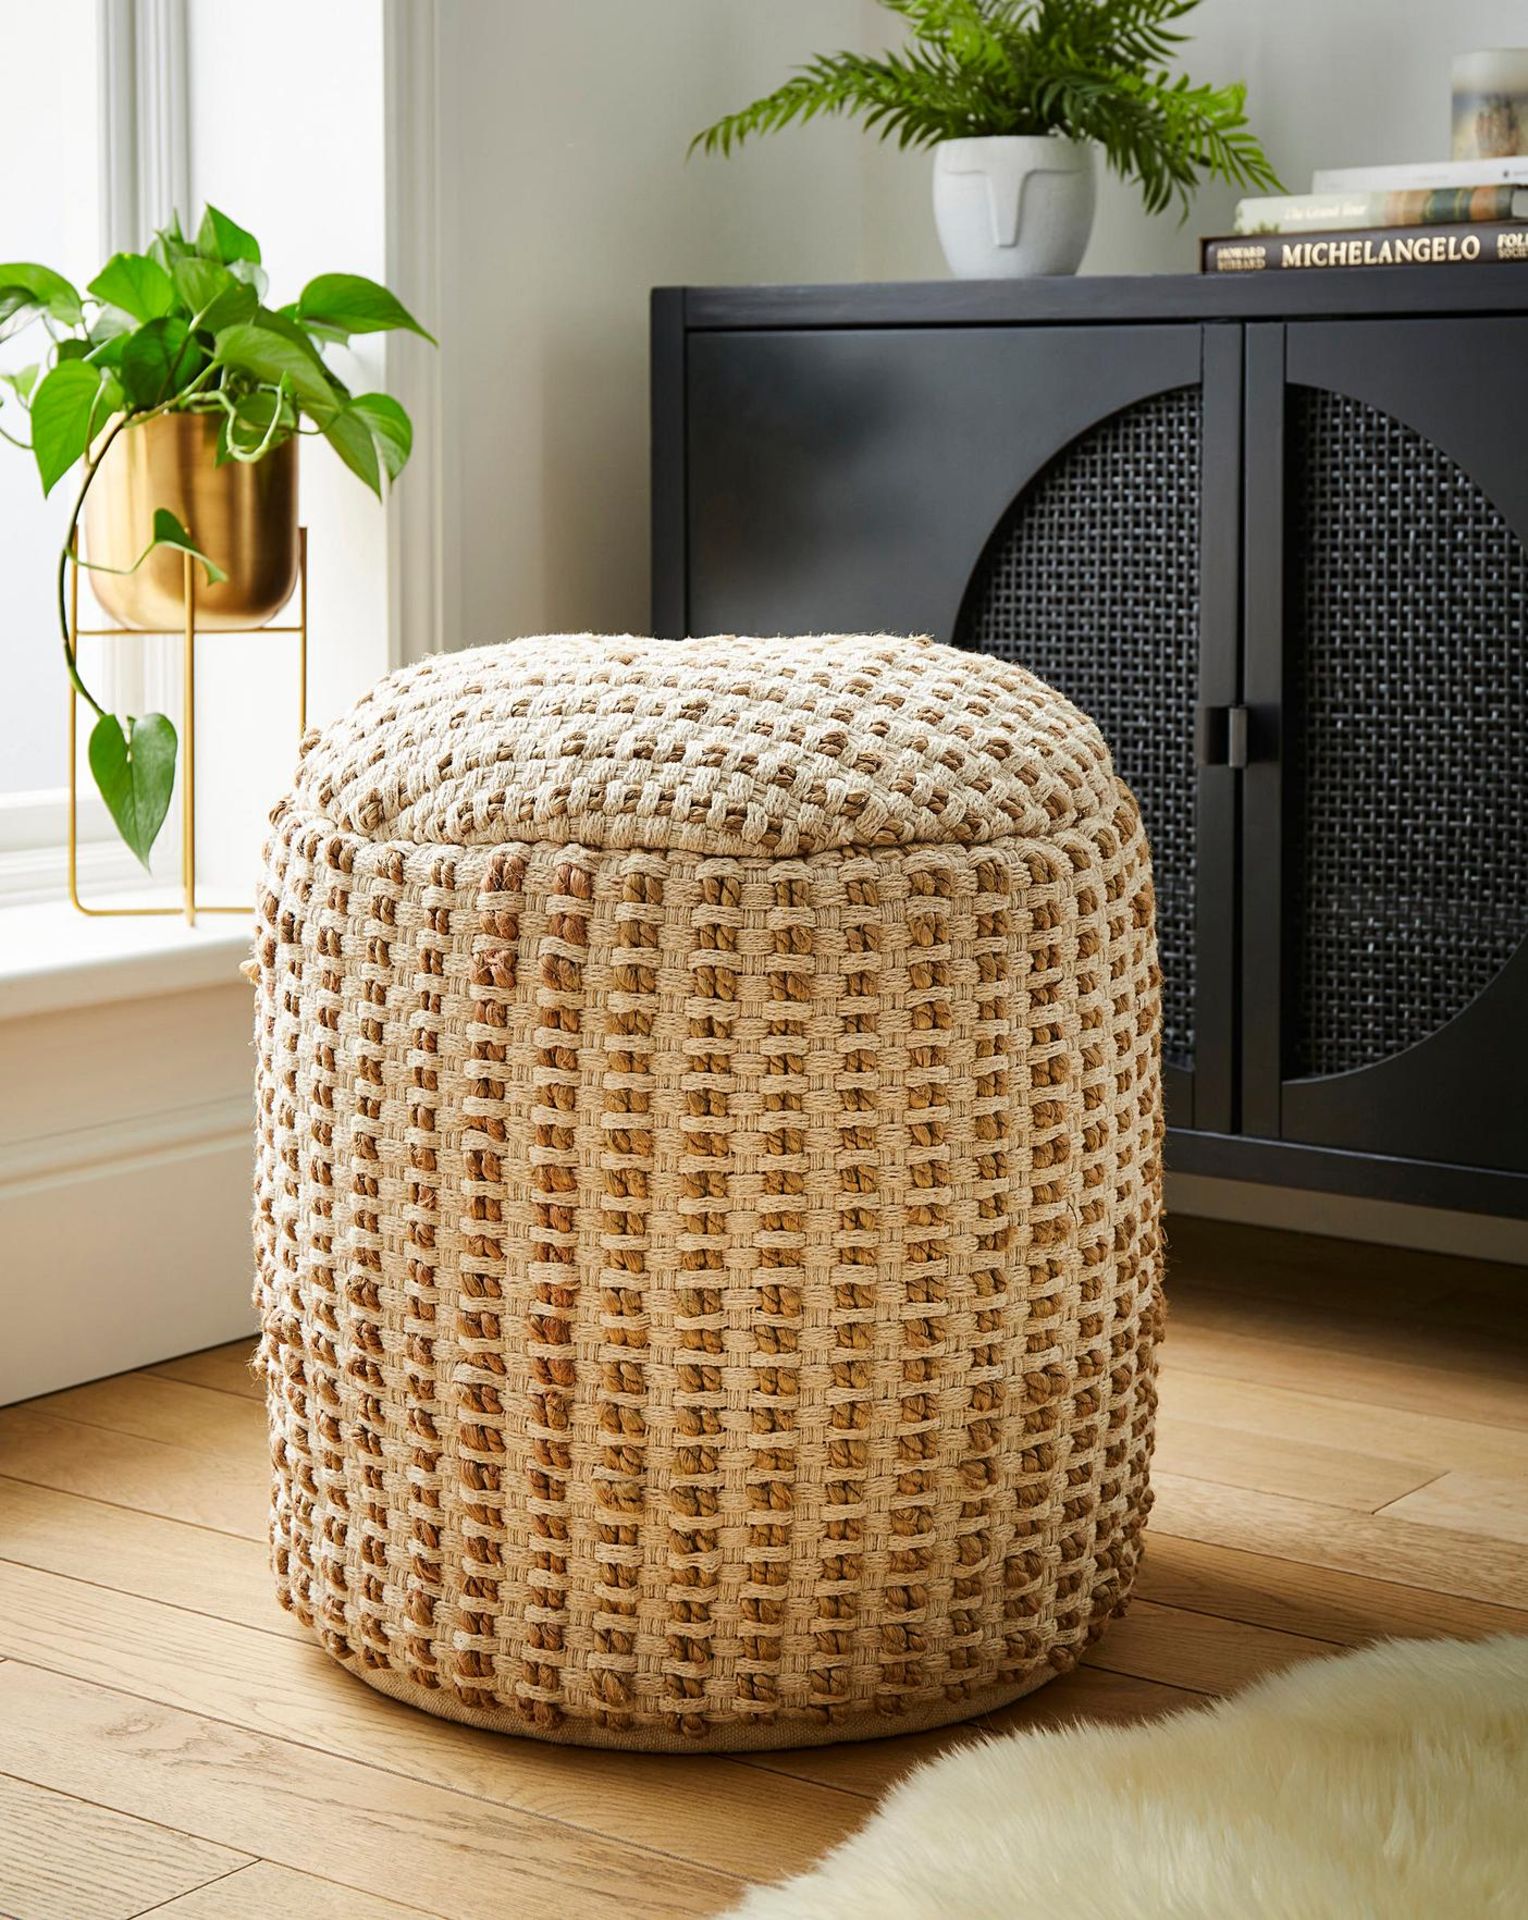 2x NEW & BOXED LUXURY WOVEN JUTE POUFFE - NATURAL. RRP £89 EACH. (R18-4)